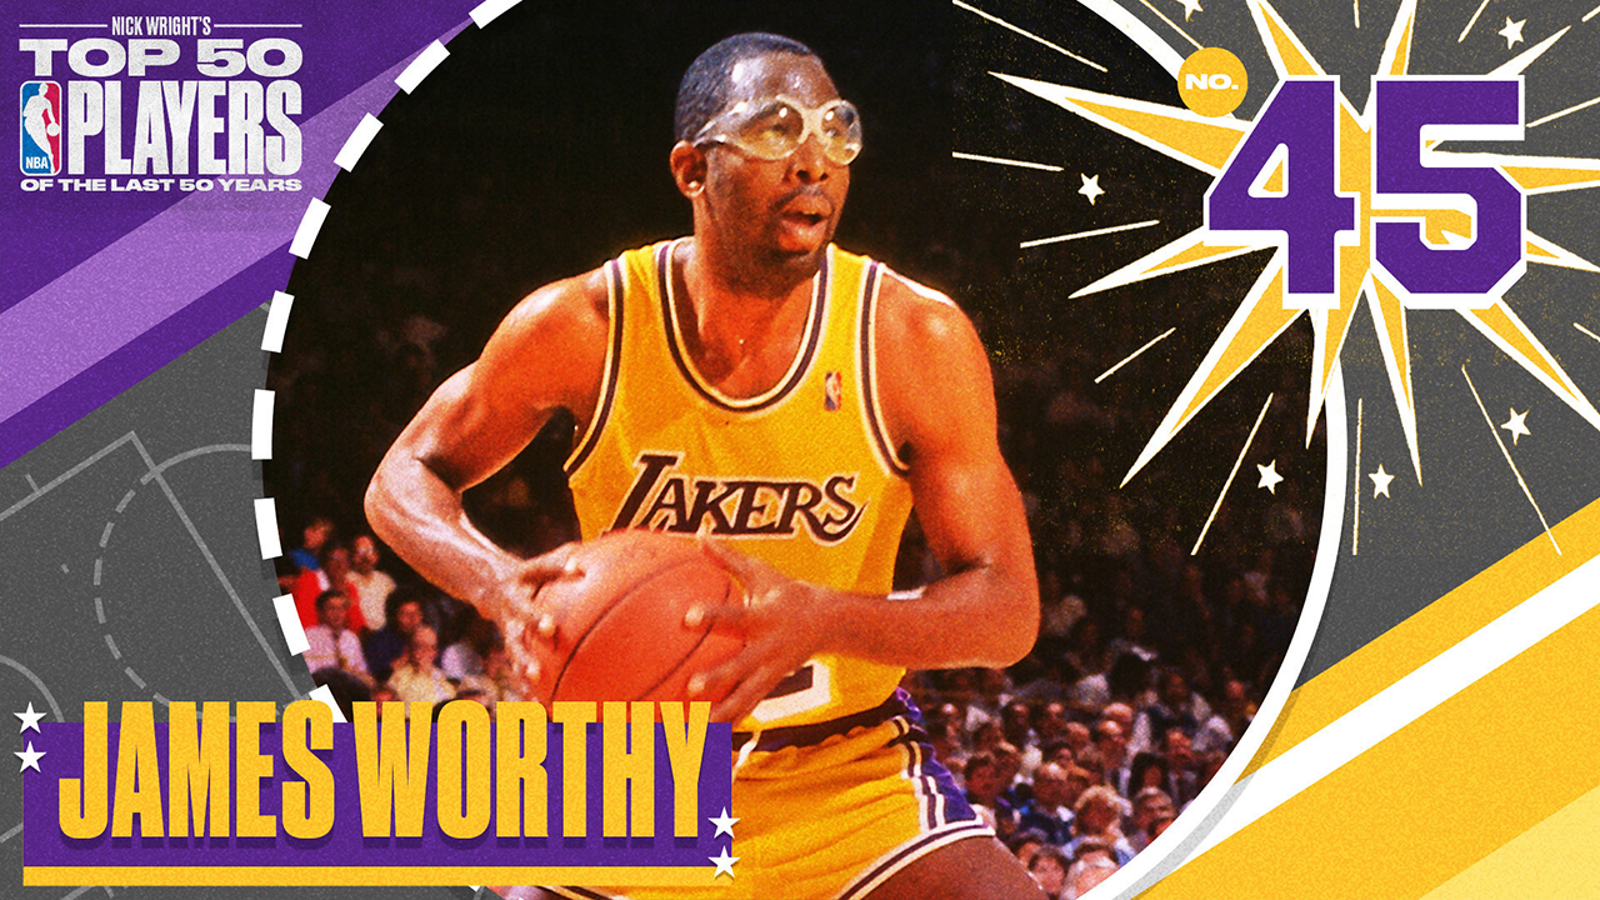 James Worthy is No. 45 on Nick Wright's Top 50